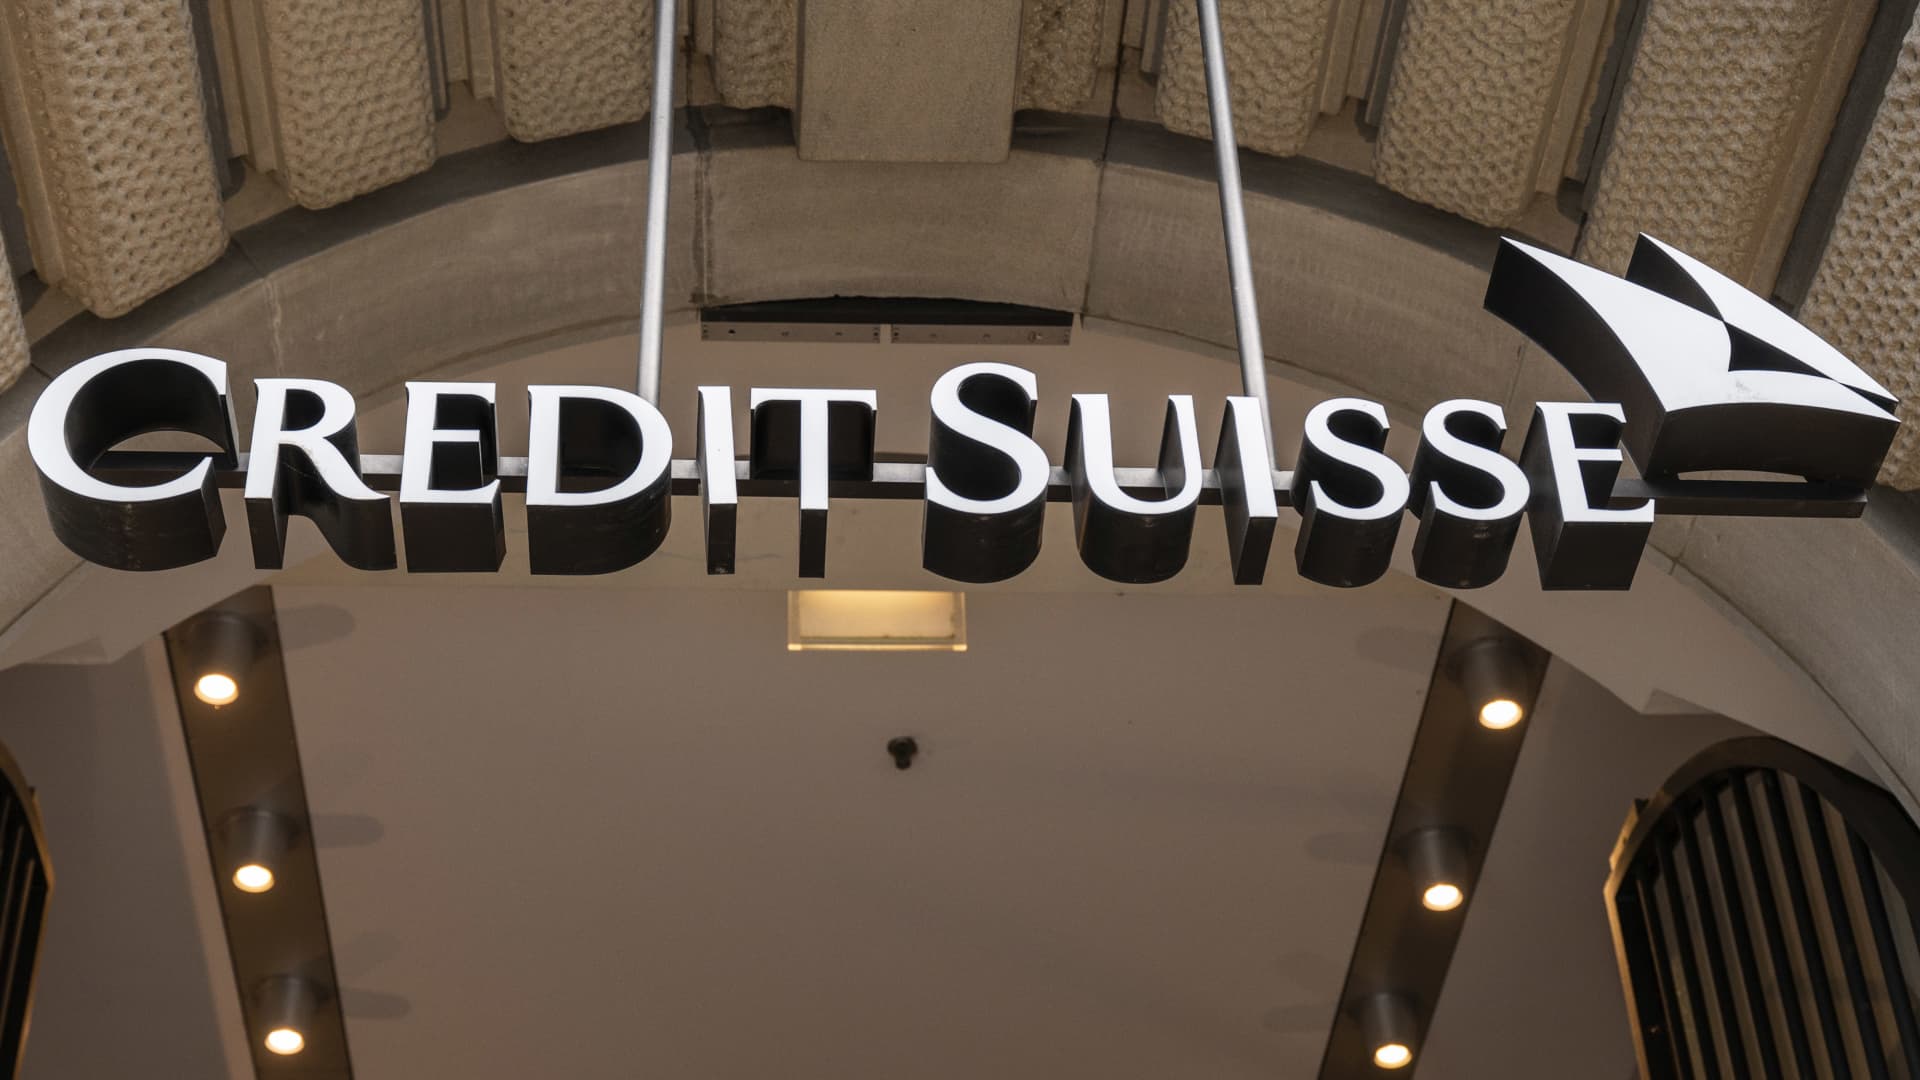 Credit Suisse is not about to cause a Lehman moment economist Sri-Kumar says – CNBC